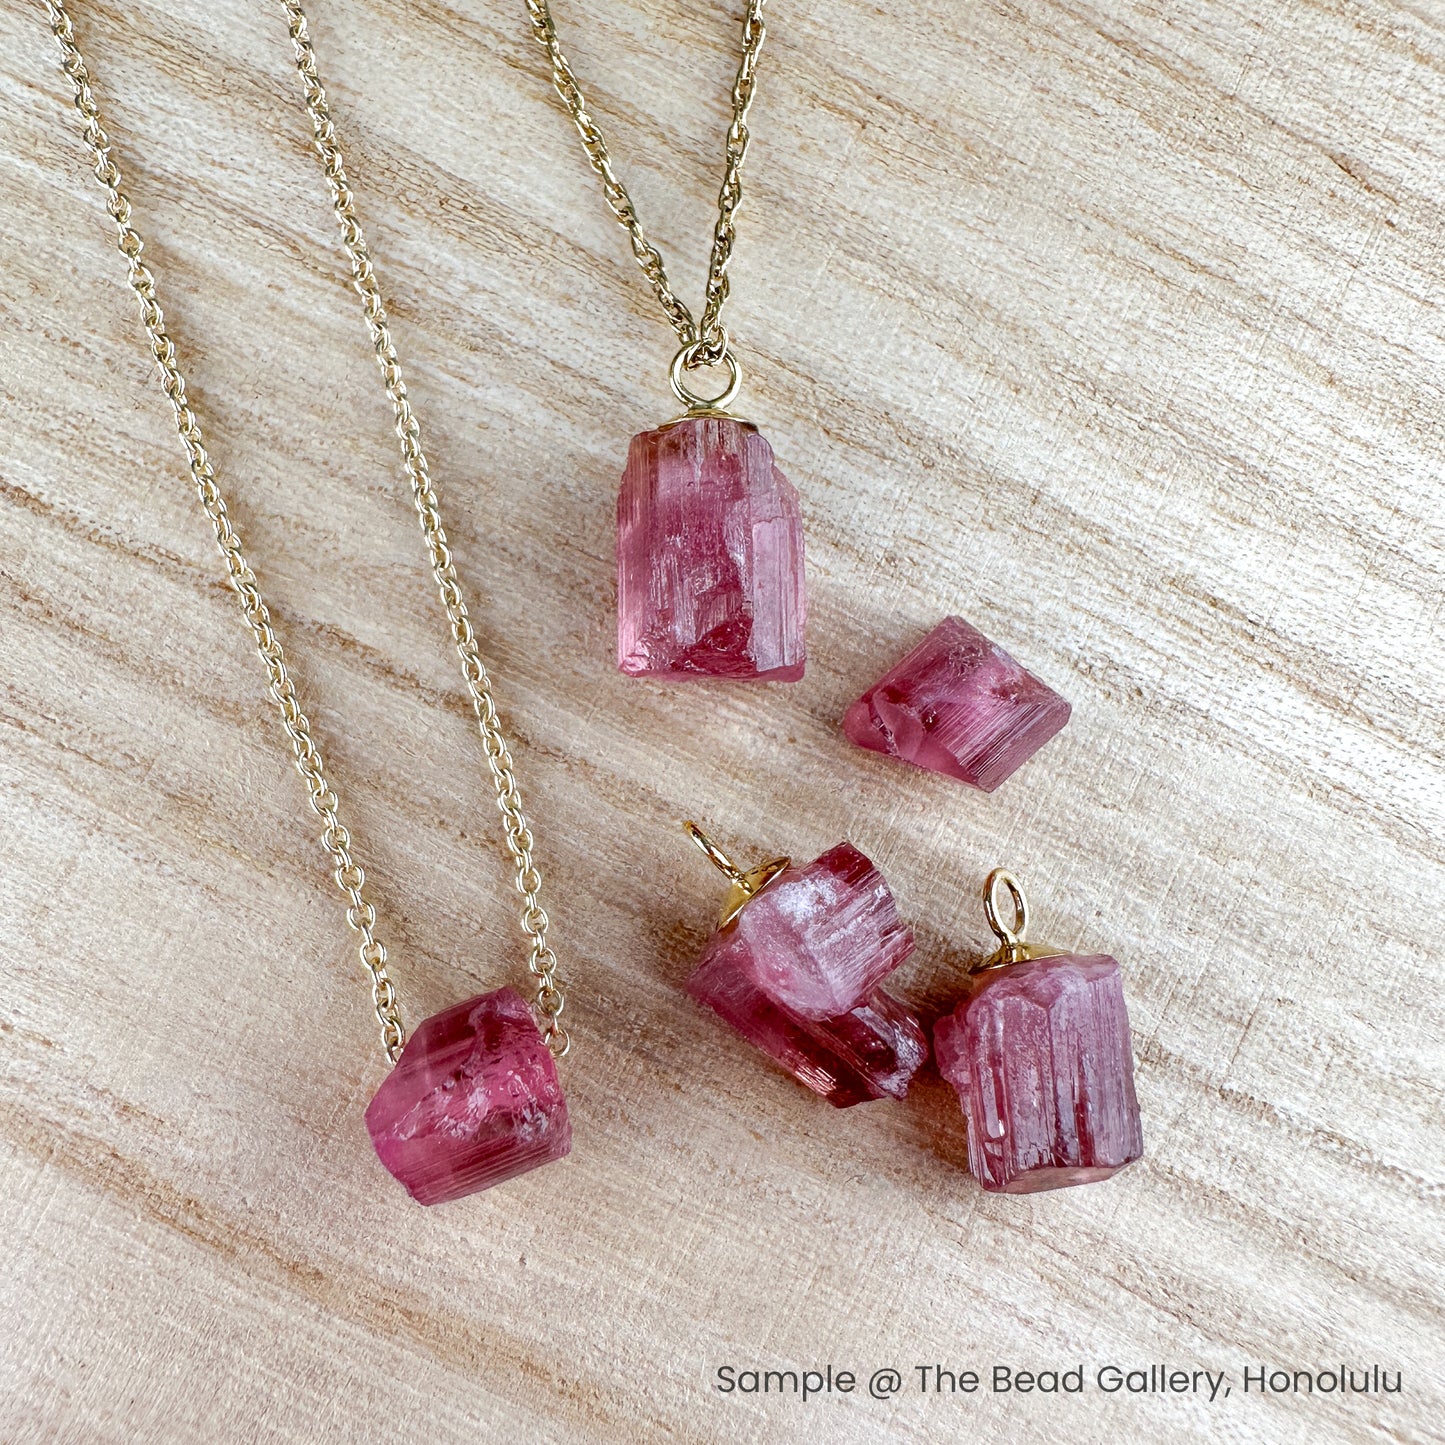 Natural Pink Rubellite Tourmaline Raw Crystal Specimen (2 Options) - 1 pc.-The Bead Gallery Honolulu